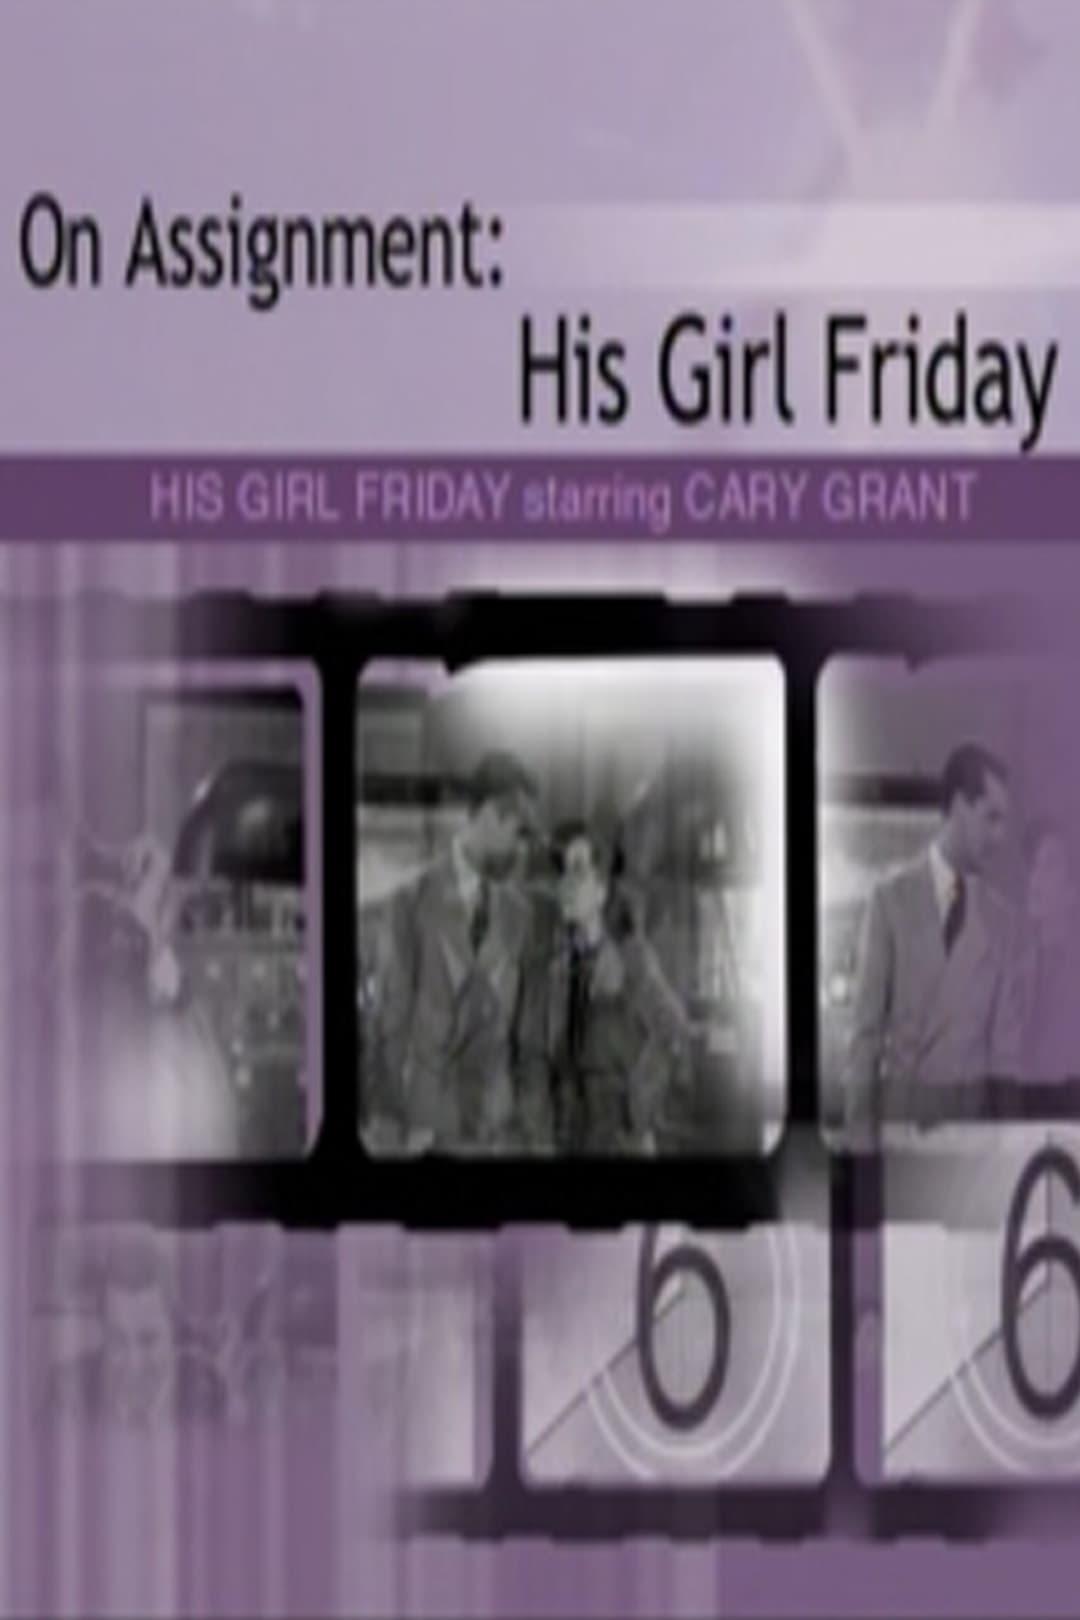 On Assignment: 'His Girl Friday' poster